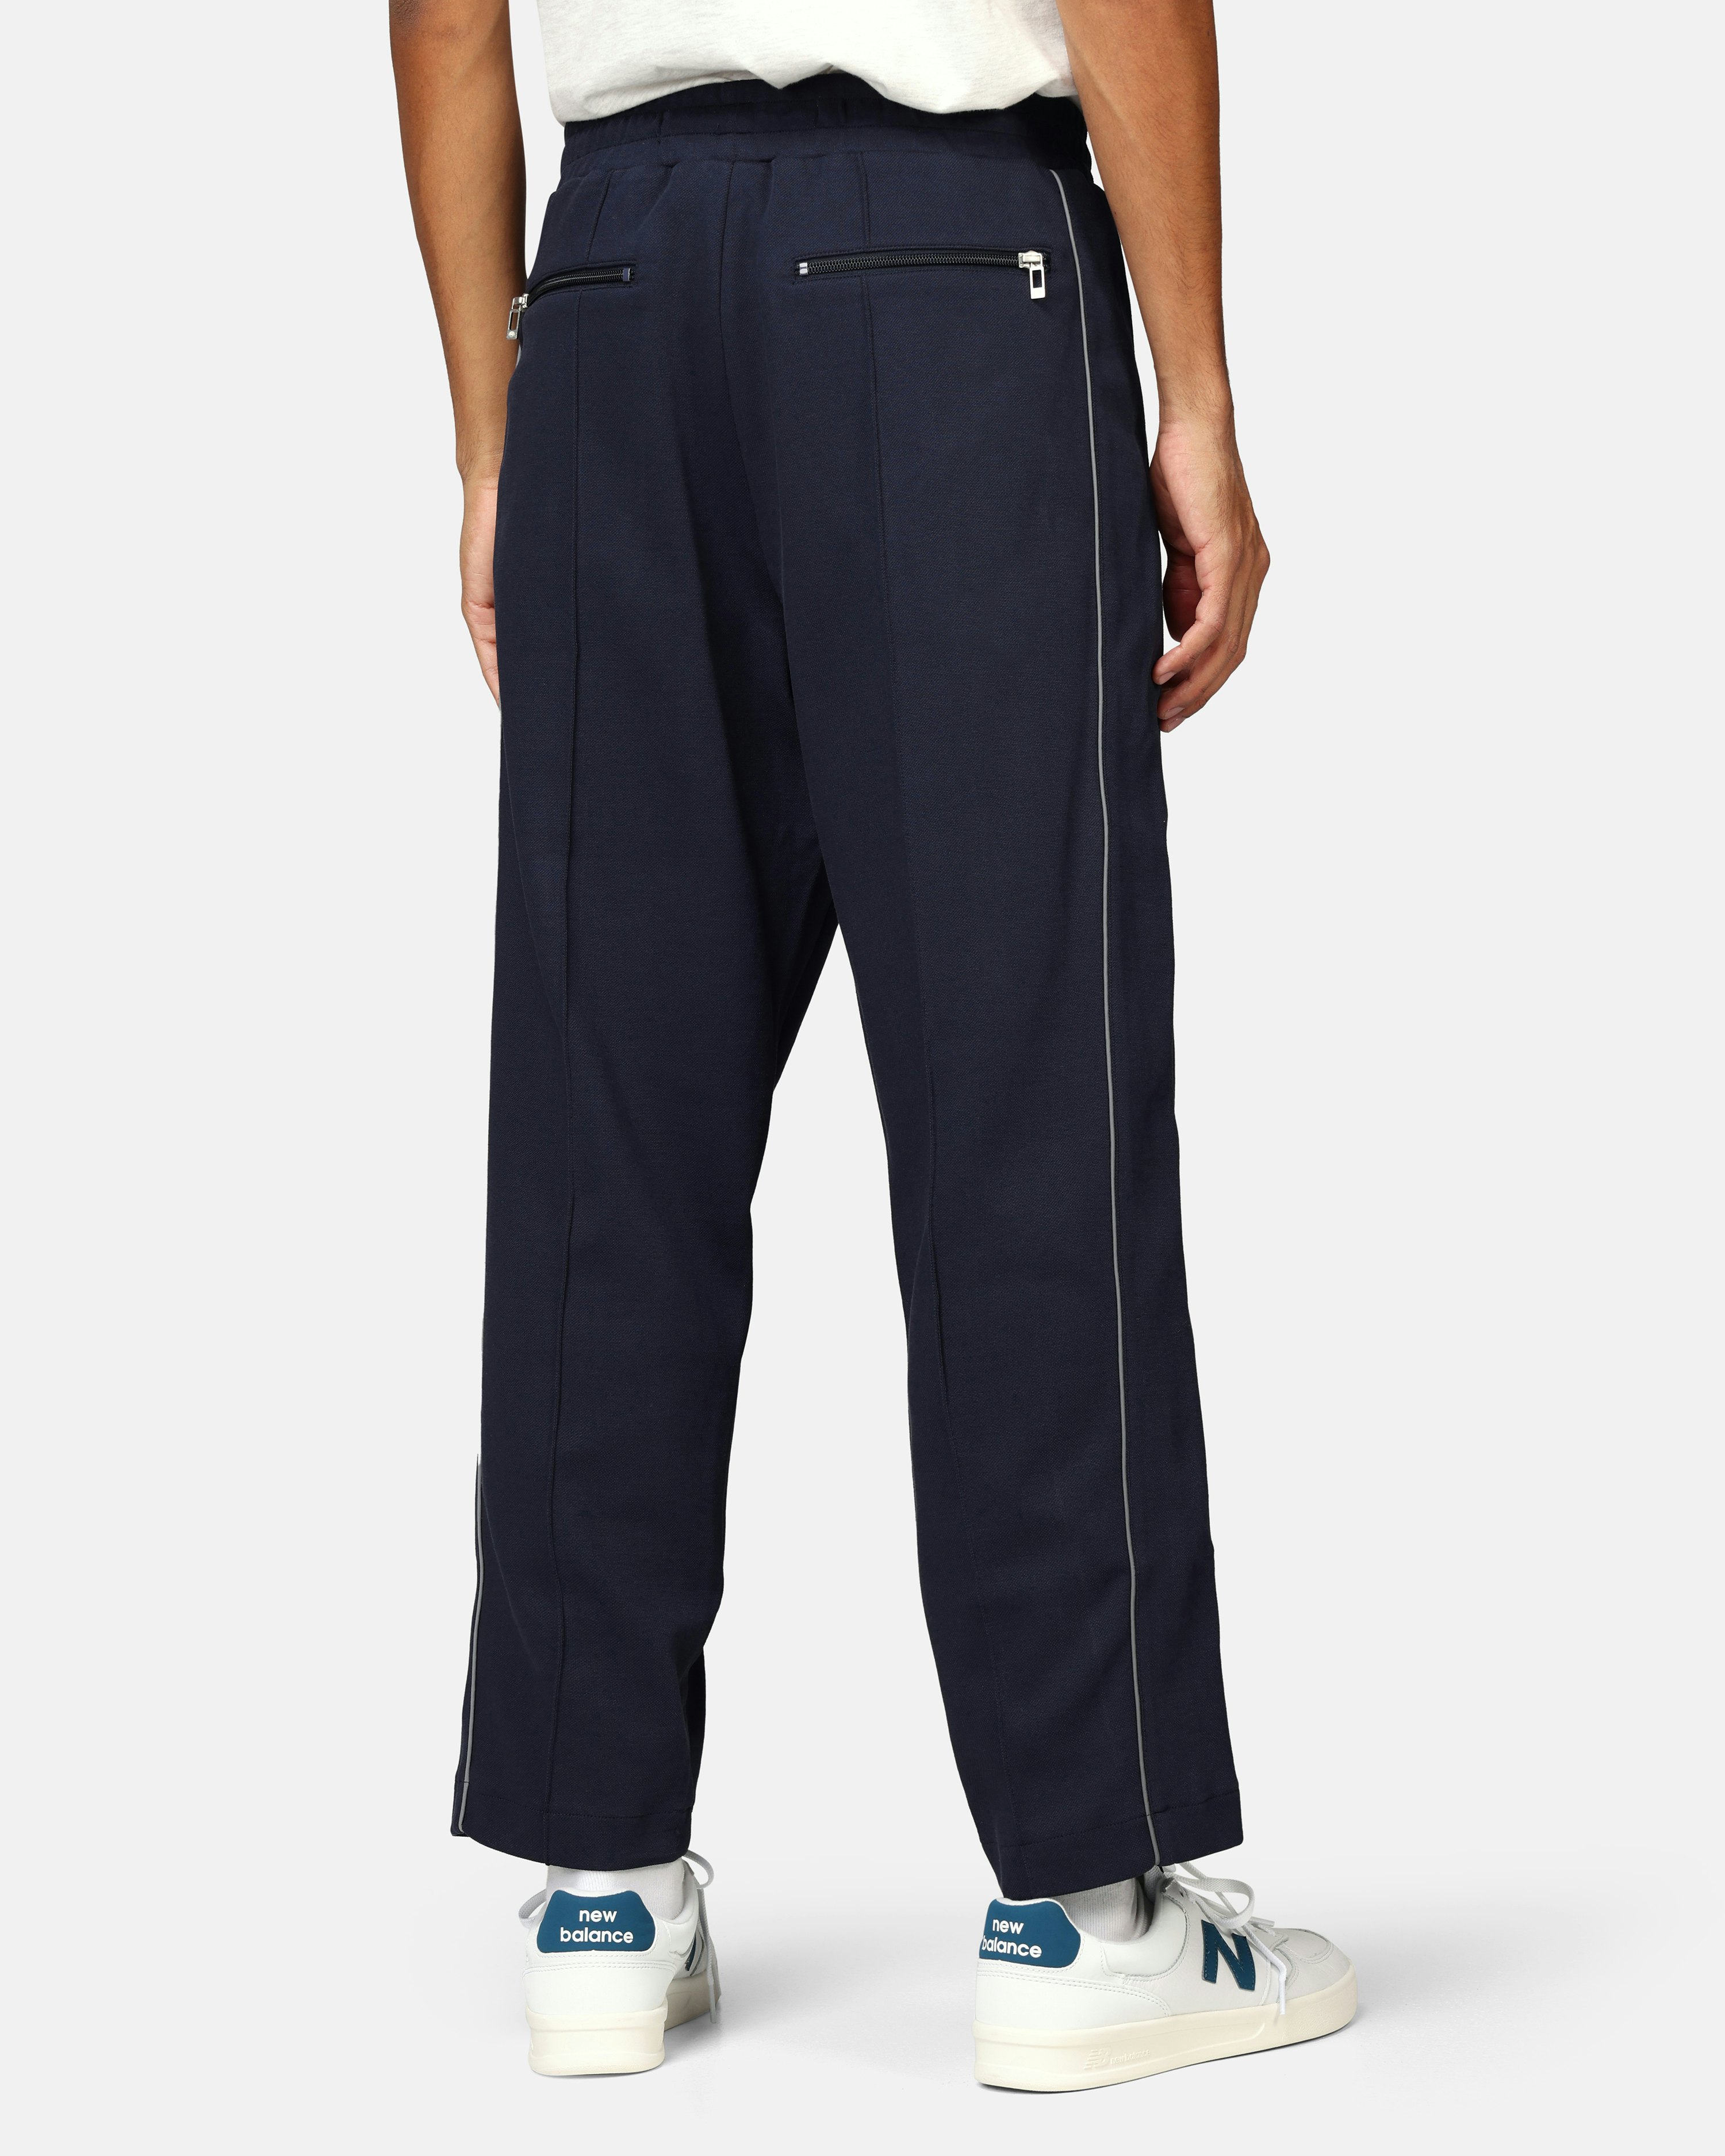 New Amsterdam Surf Association Track Pant - Couch Navy | Unisex